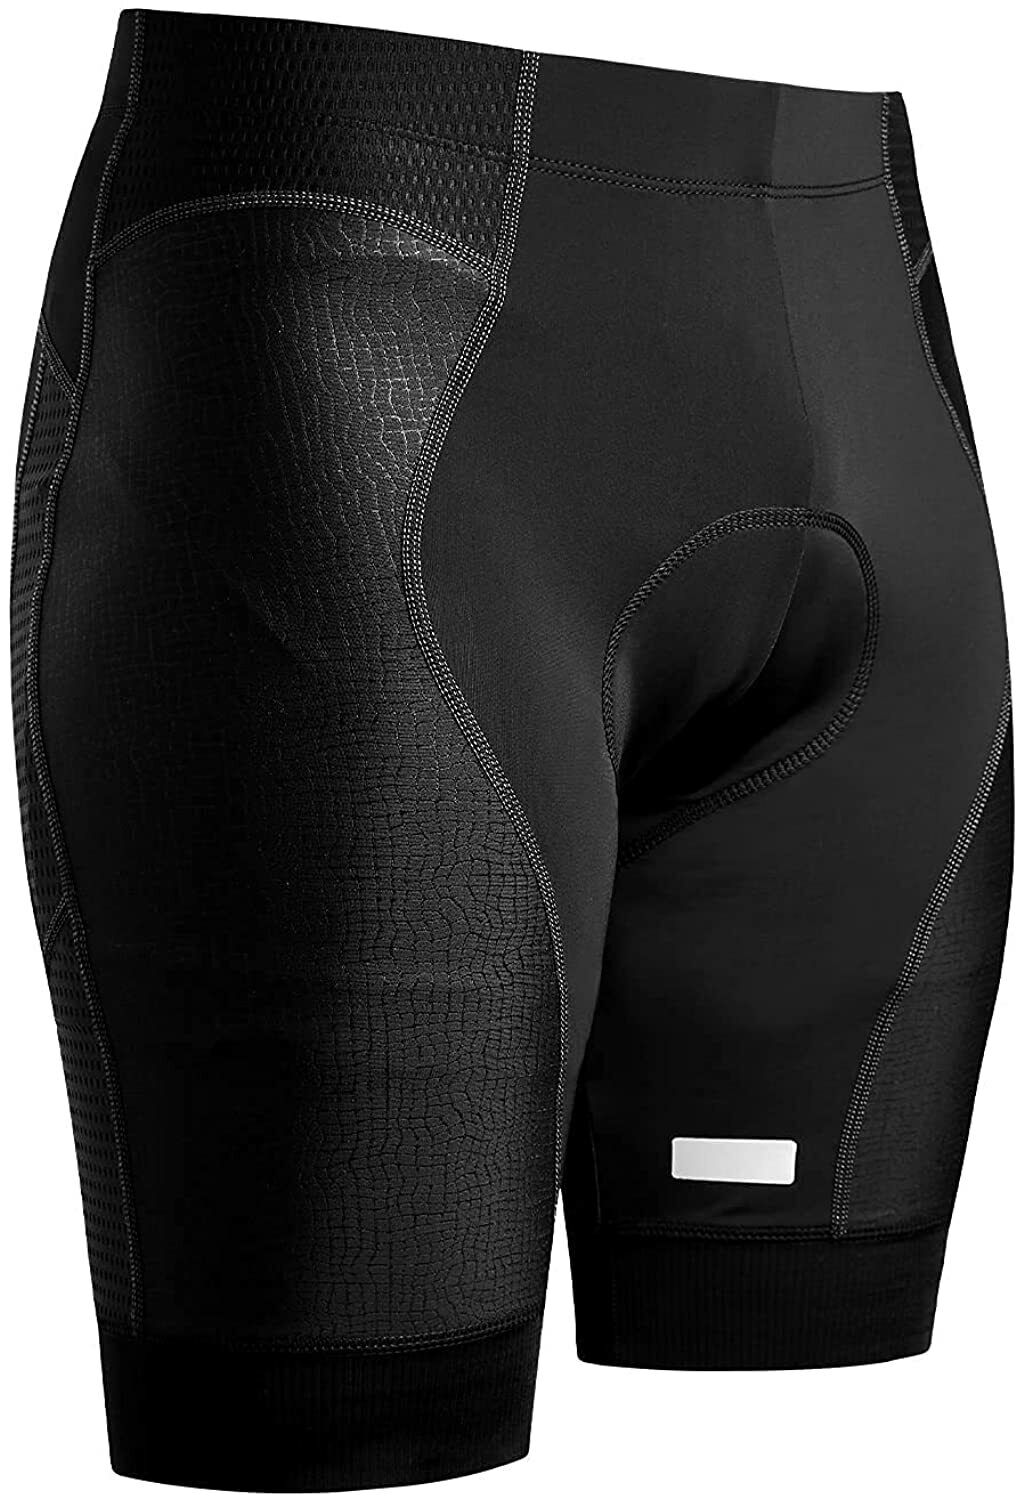 Mens Wholesale Cycling Shorts Bike Underwear Purchase for Men 4D Padded Bicycle Bl